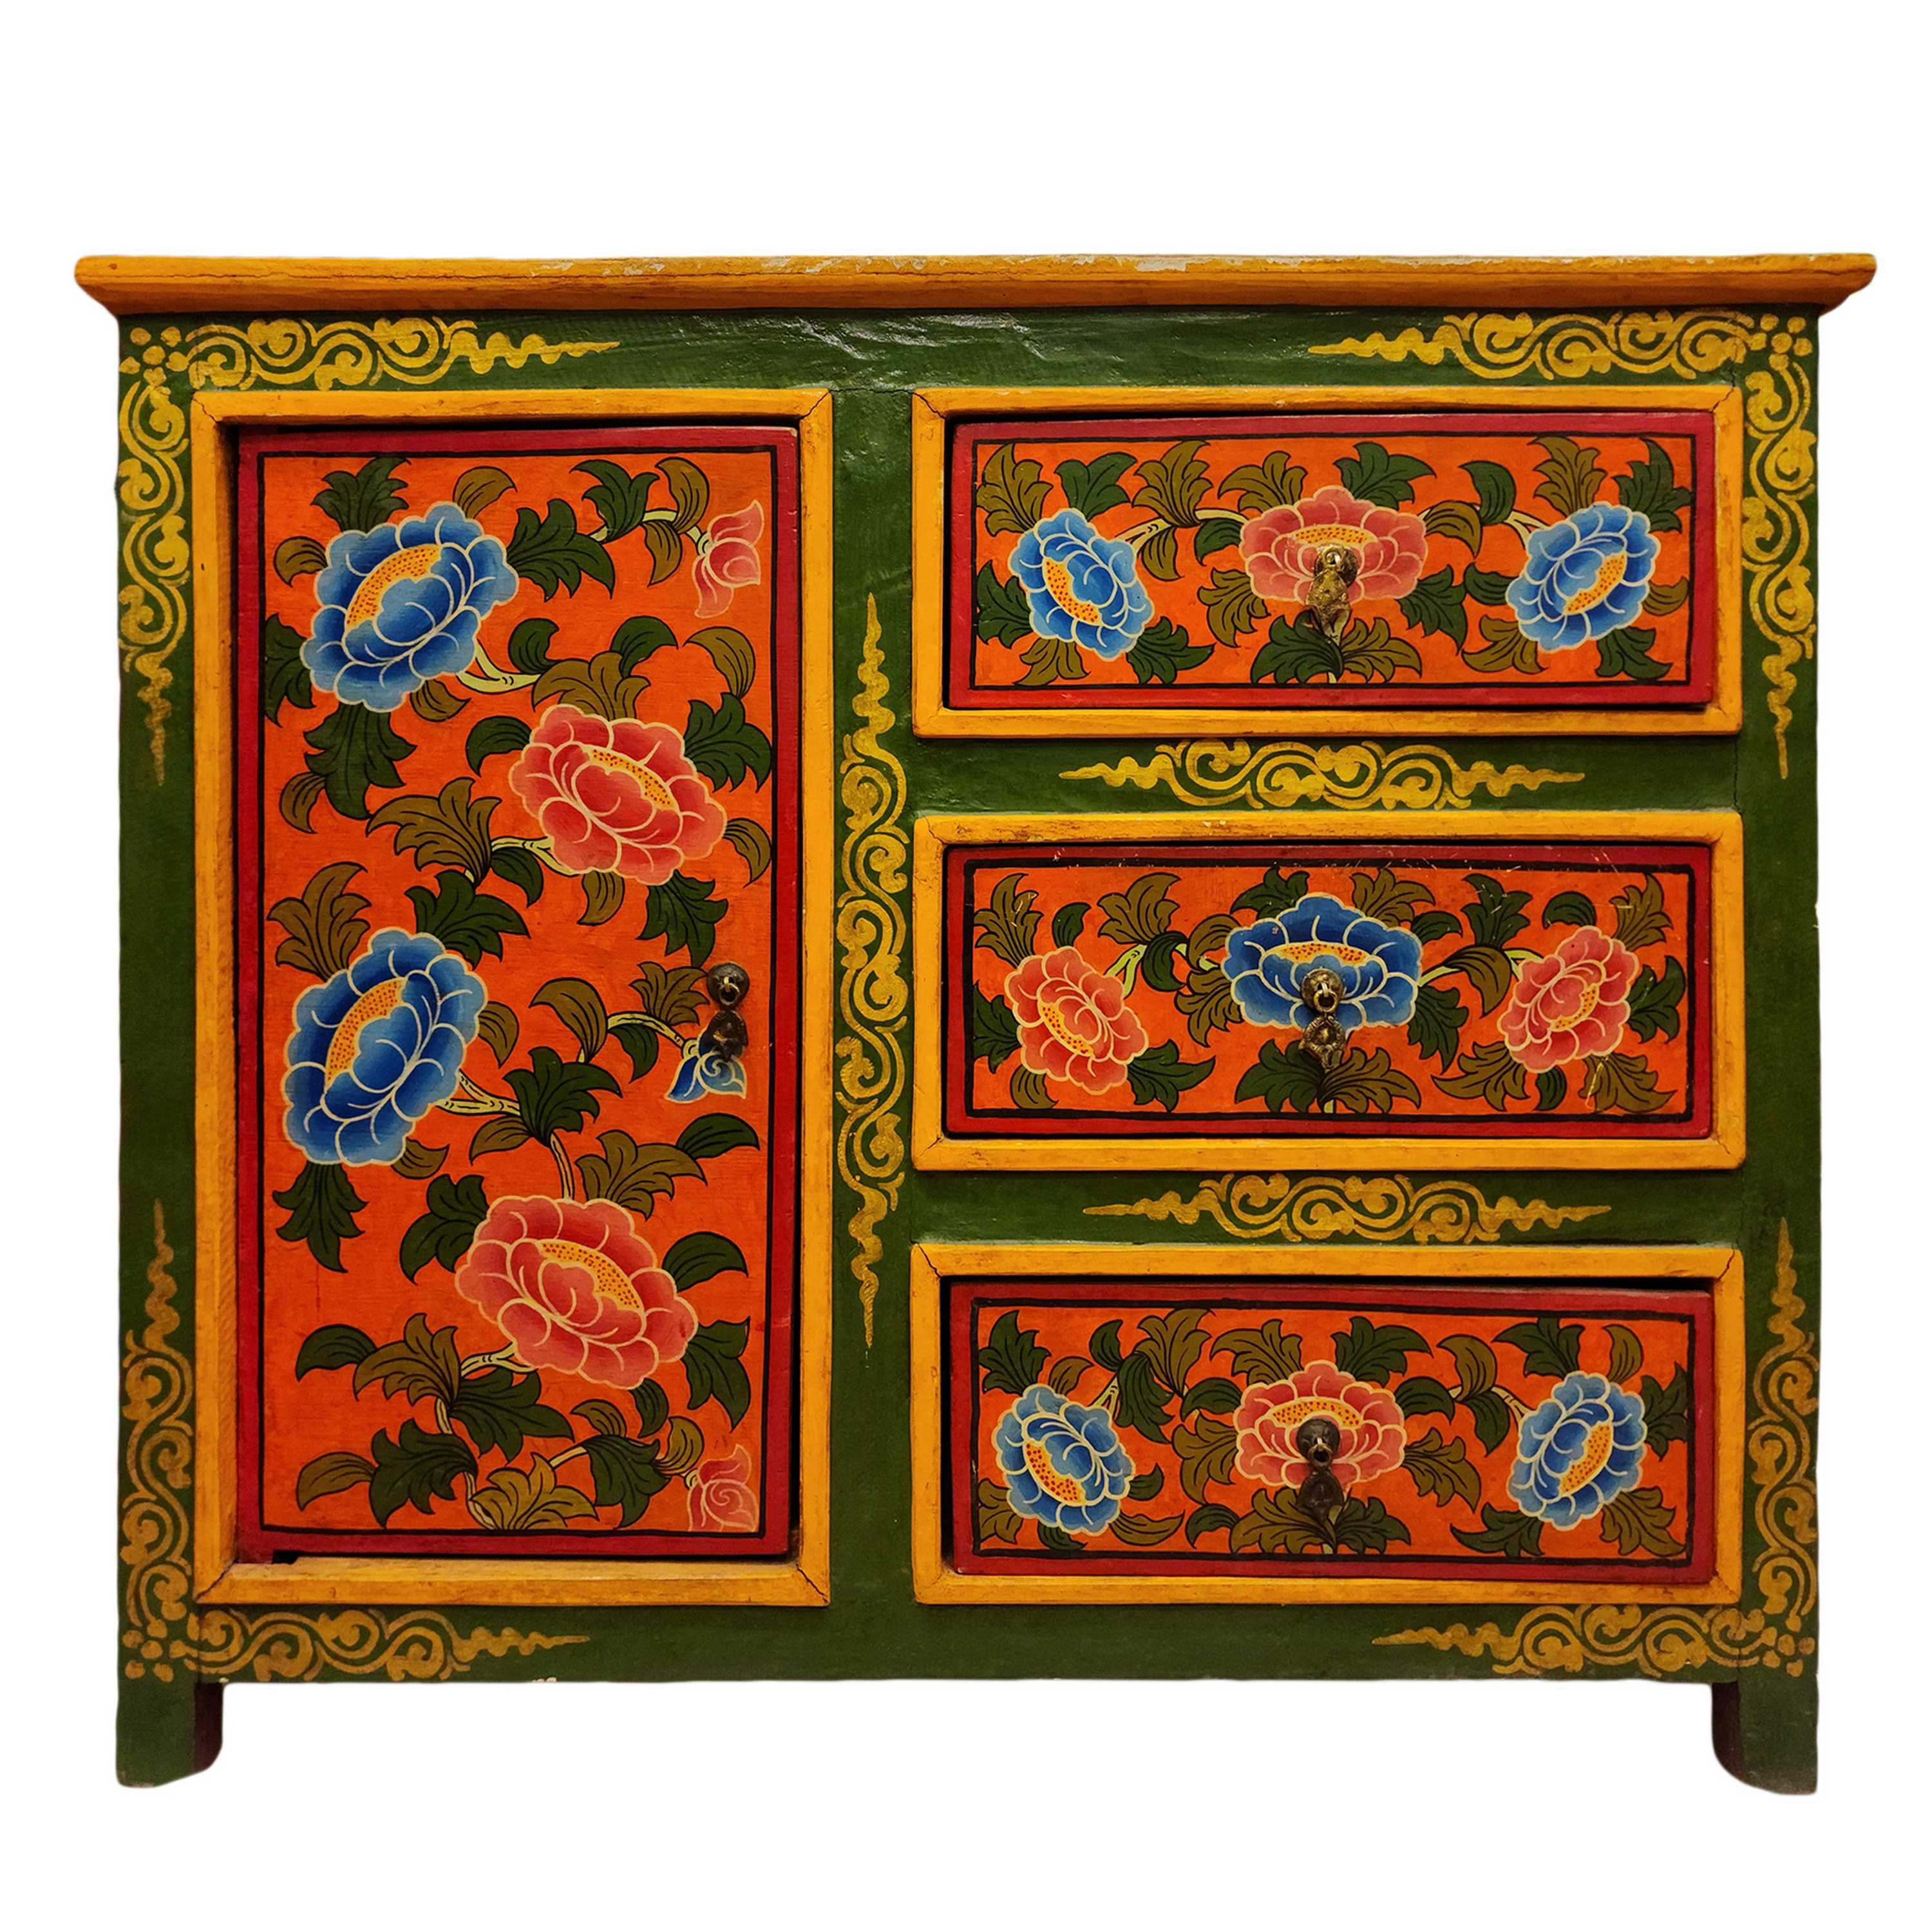 Tibetan Cabinet With Three Drawer And One Door Cabinet, painted